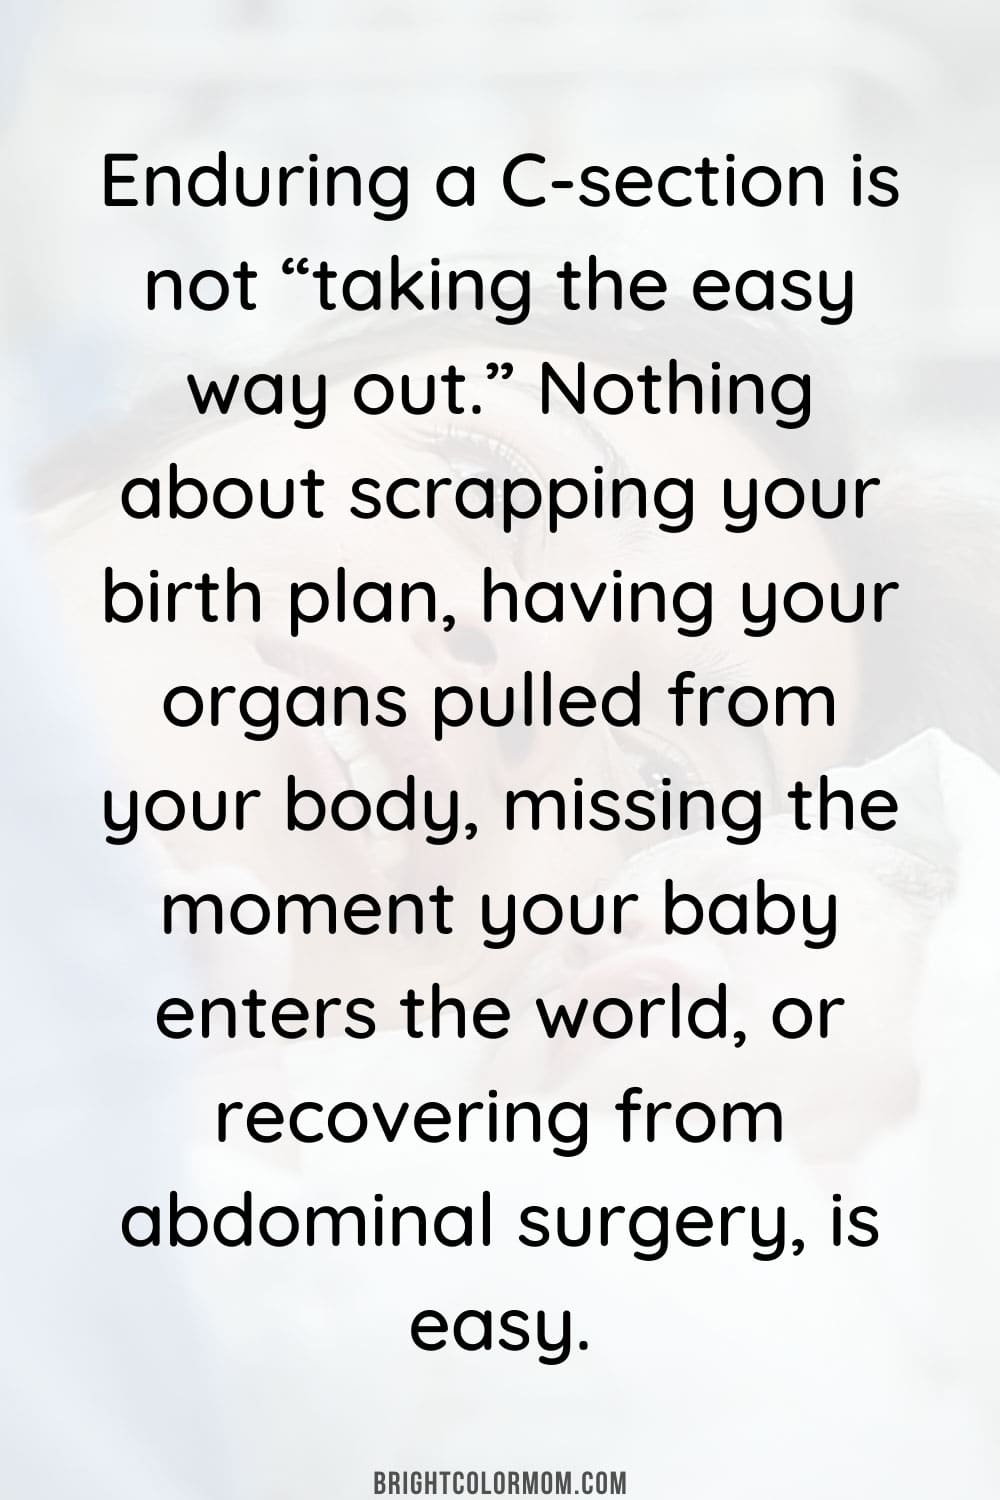 23 Truly Inspirational C-Section Quotes for Scar Moms